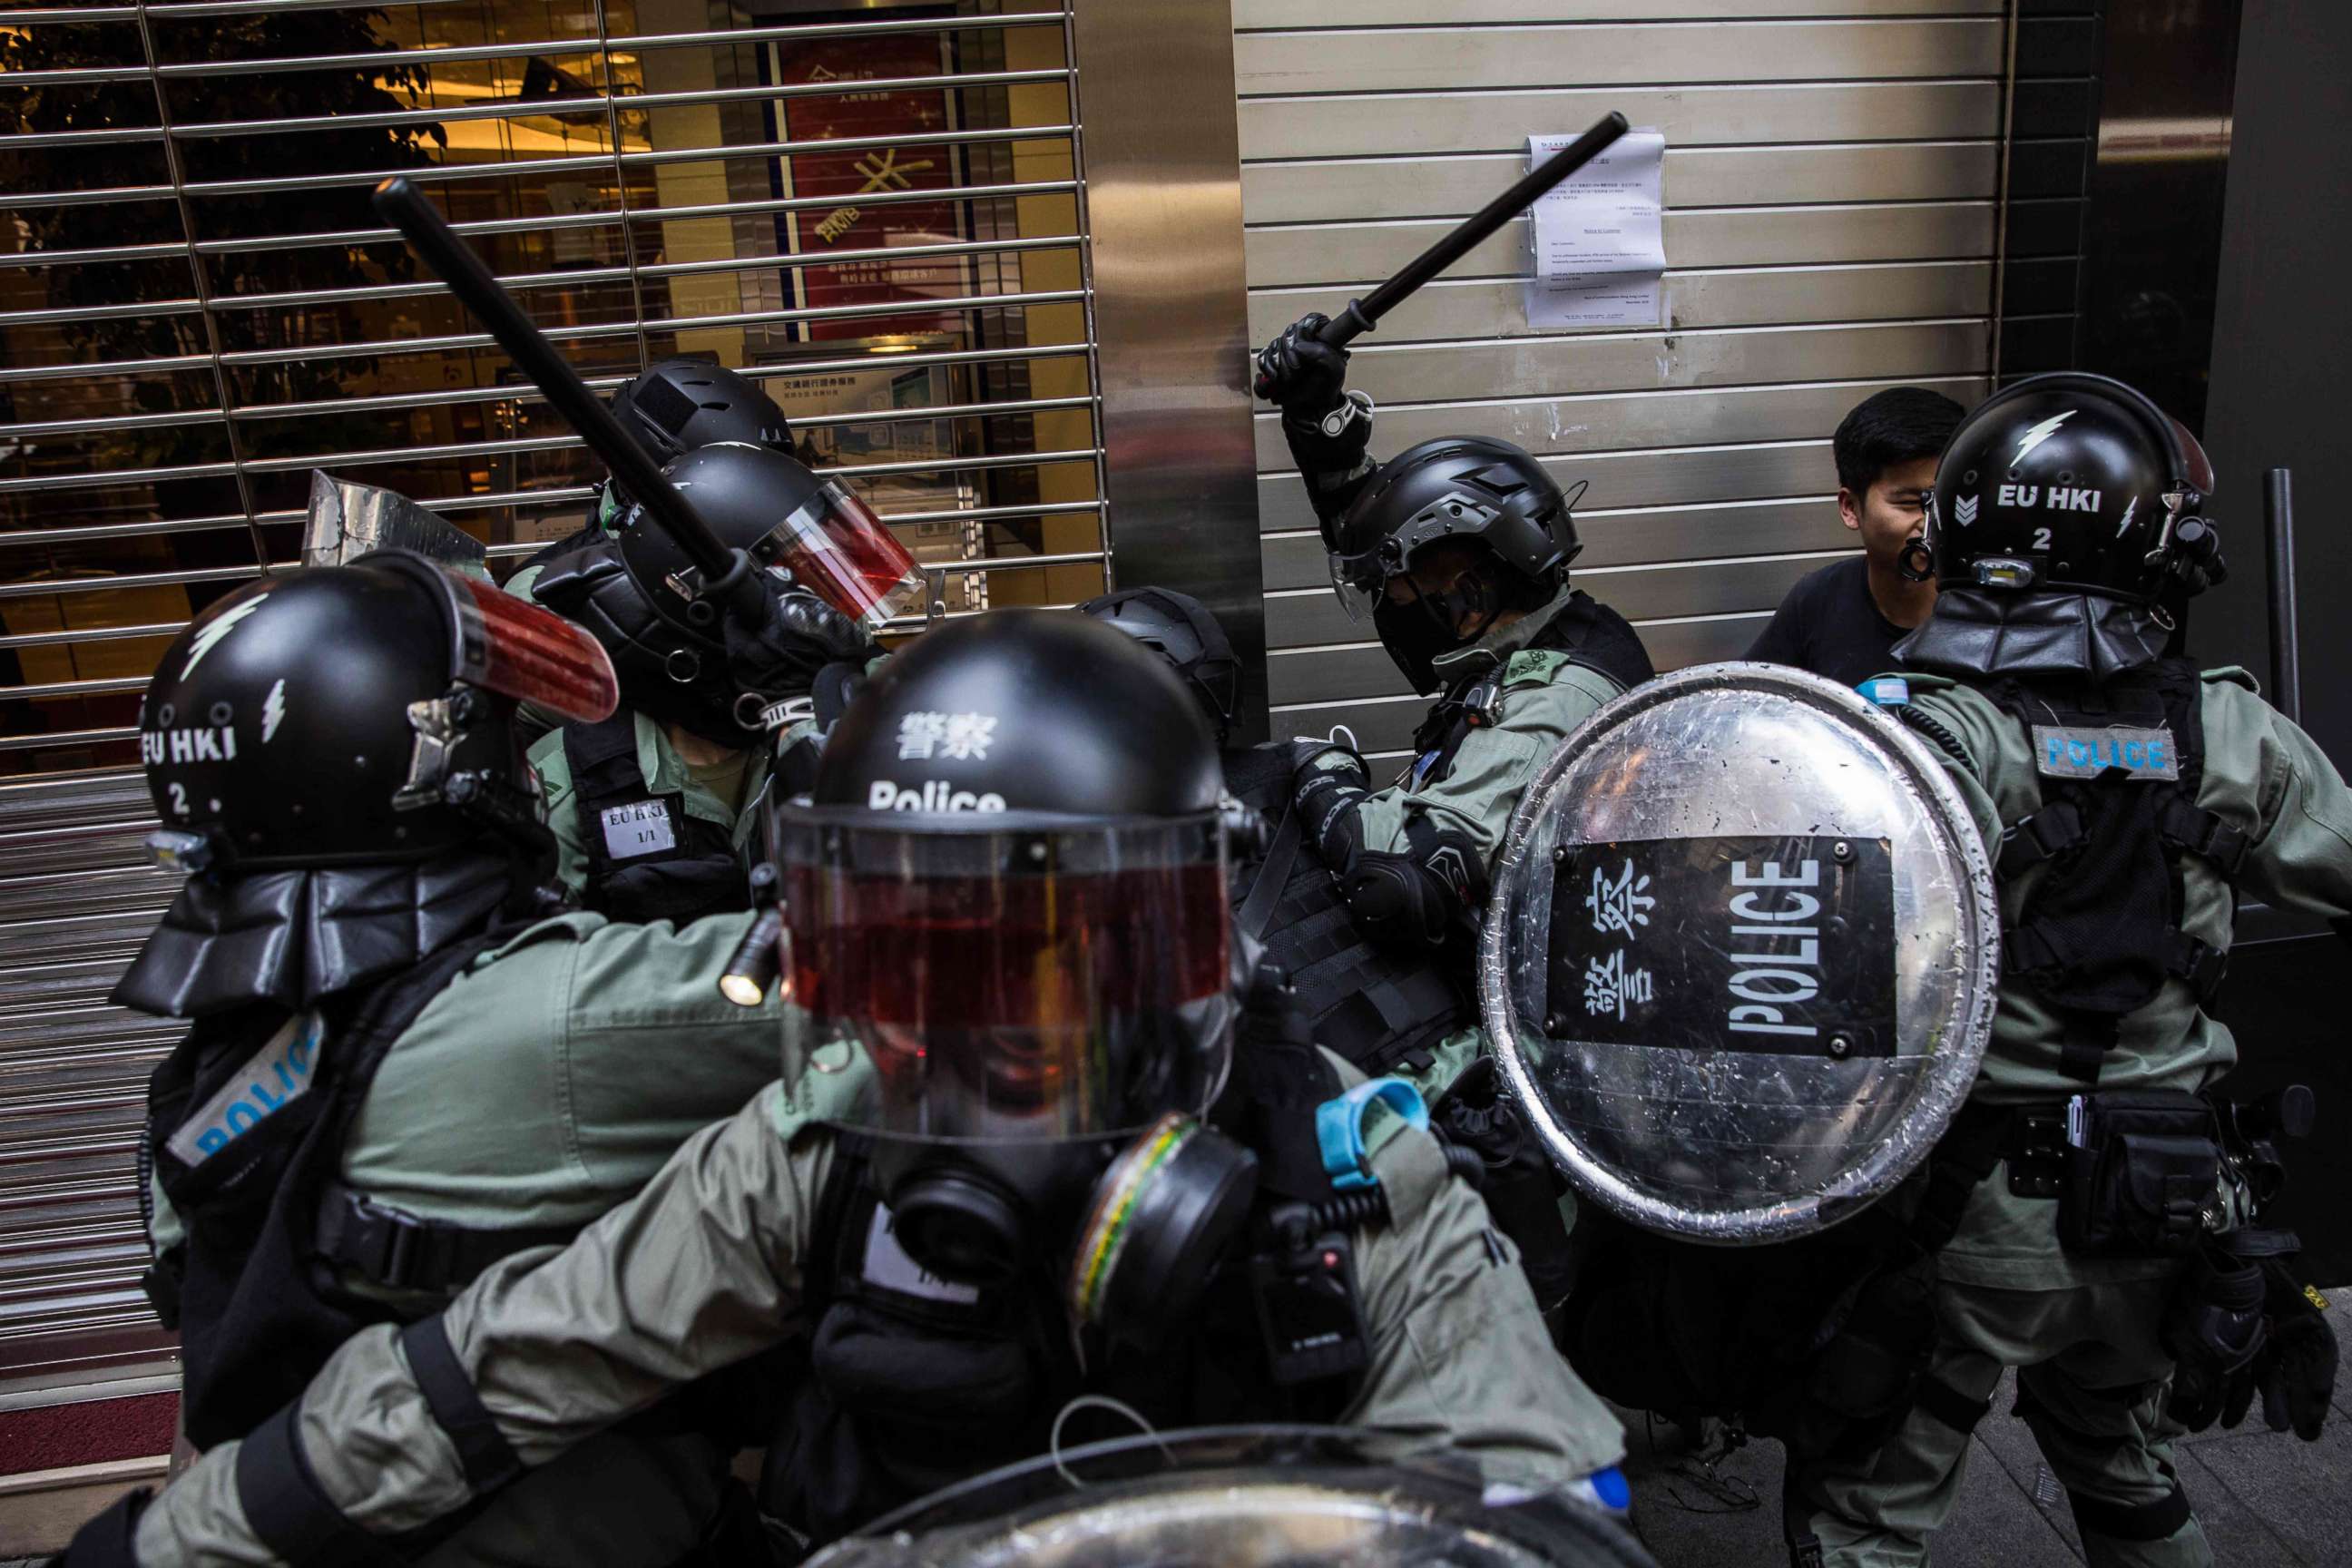 PHOTO: Riot police detain two men in the Central district of Hong Kong on November 11, 2019, as clashes ignited across the city and and crowds took to the streets to block roads and hurl insults at officers. (Photo by DALE DE LA REY/AFP via Getty Images)